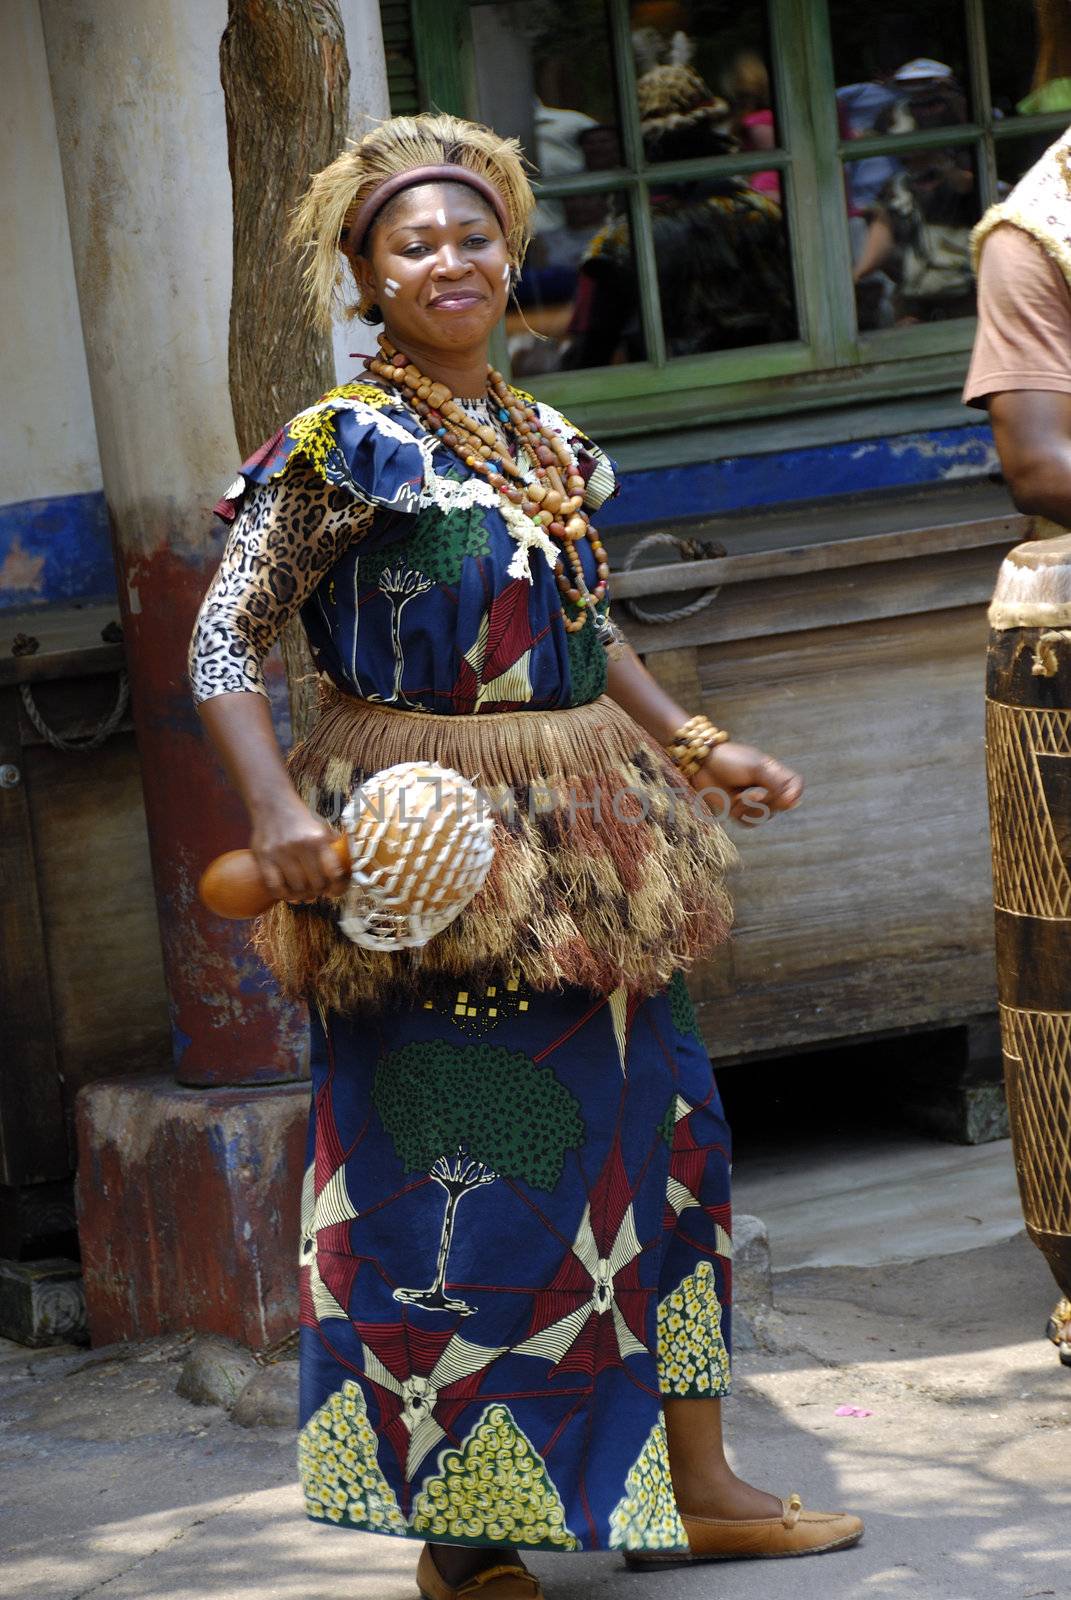 African artist performing on the streets